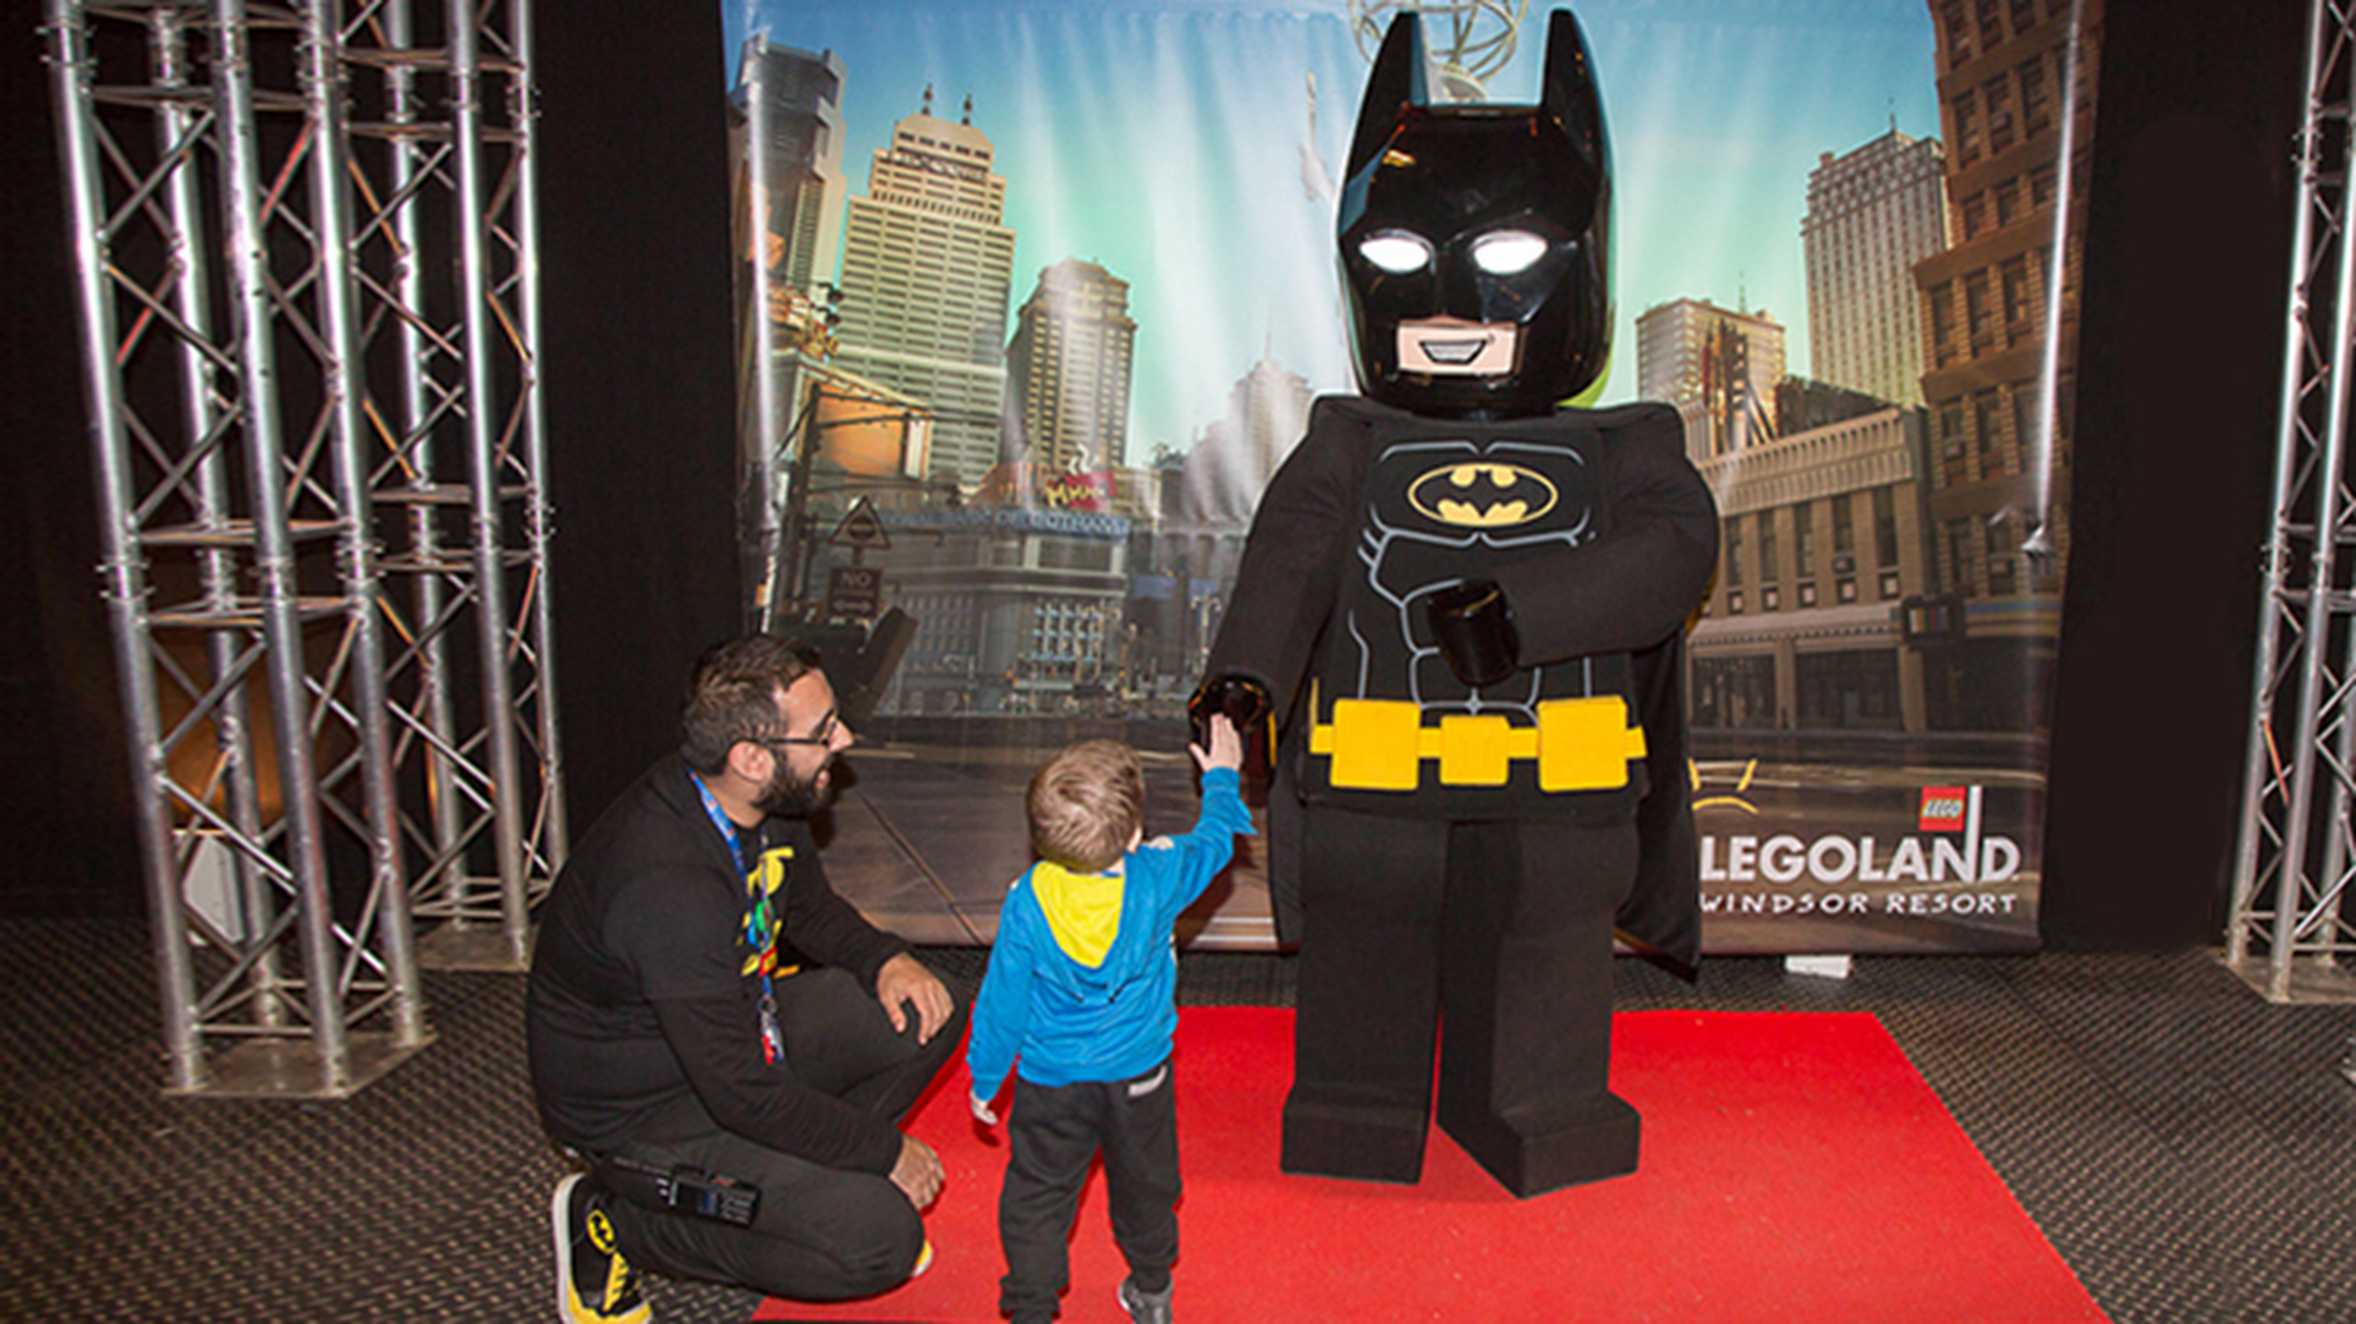 Zak shaking the hand of Lego Batman while a staff member watches on.